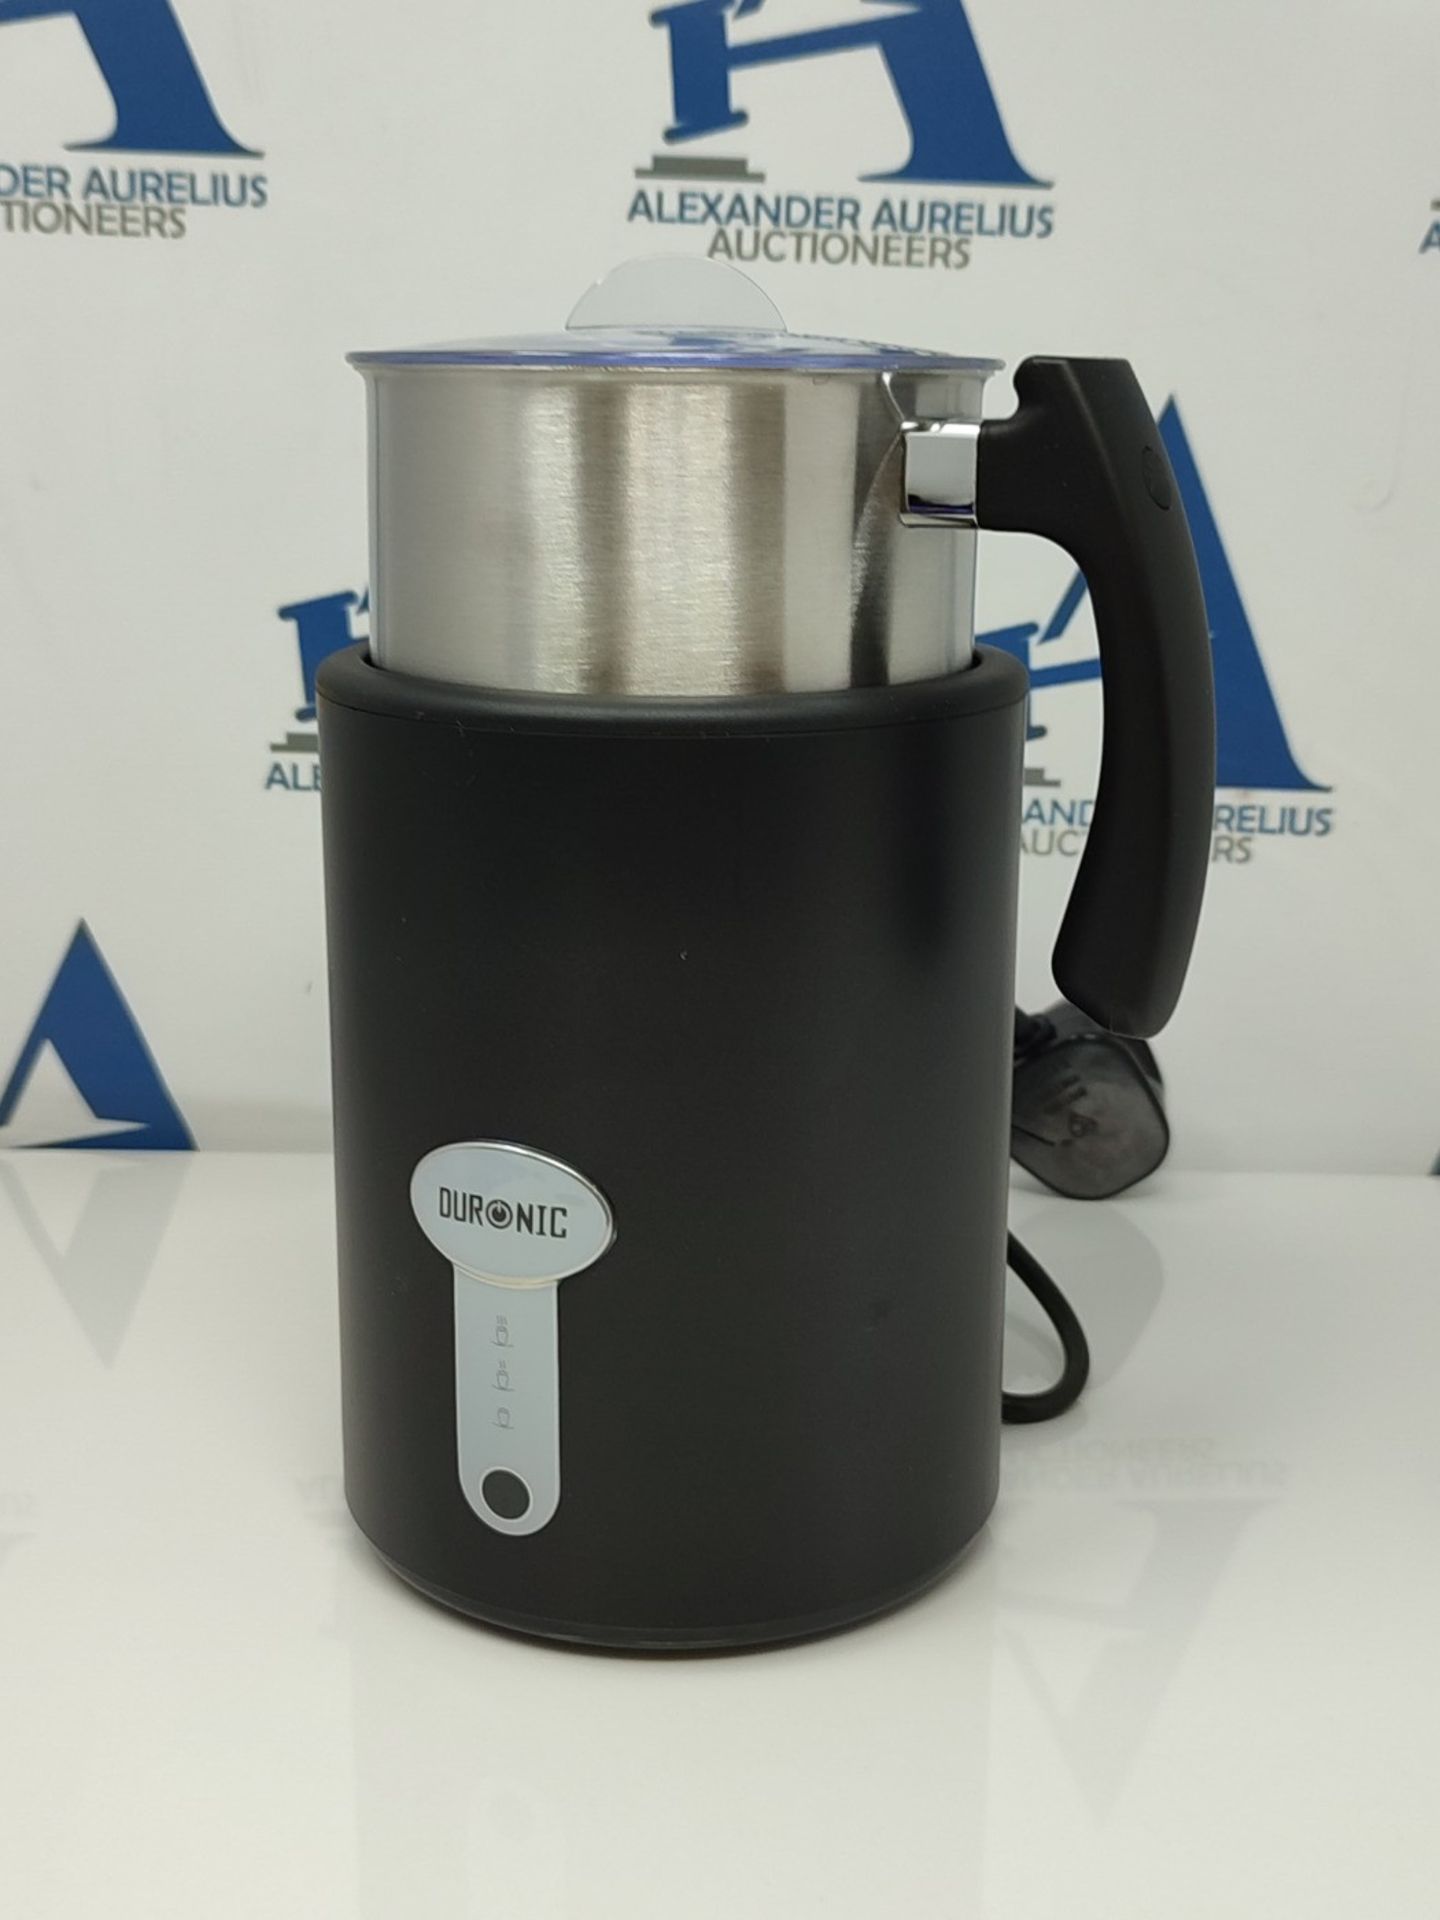 Duronic MF500 BK Milk Frother - 500ml Stainless-Steel Milk Frother Jug, Electric Steam - Image 2 of 2